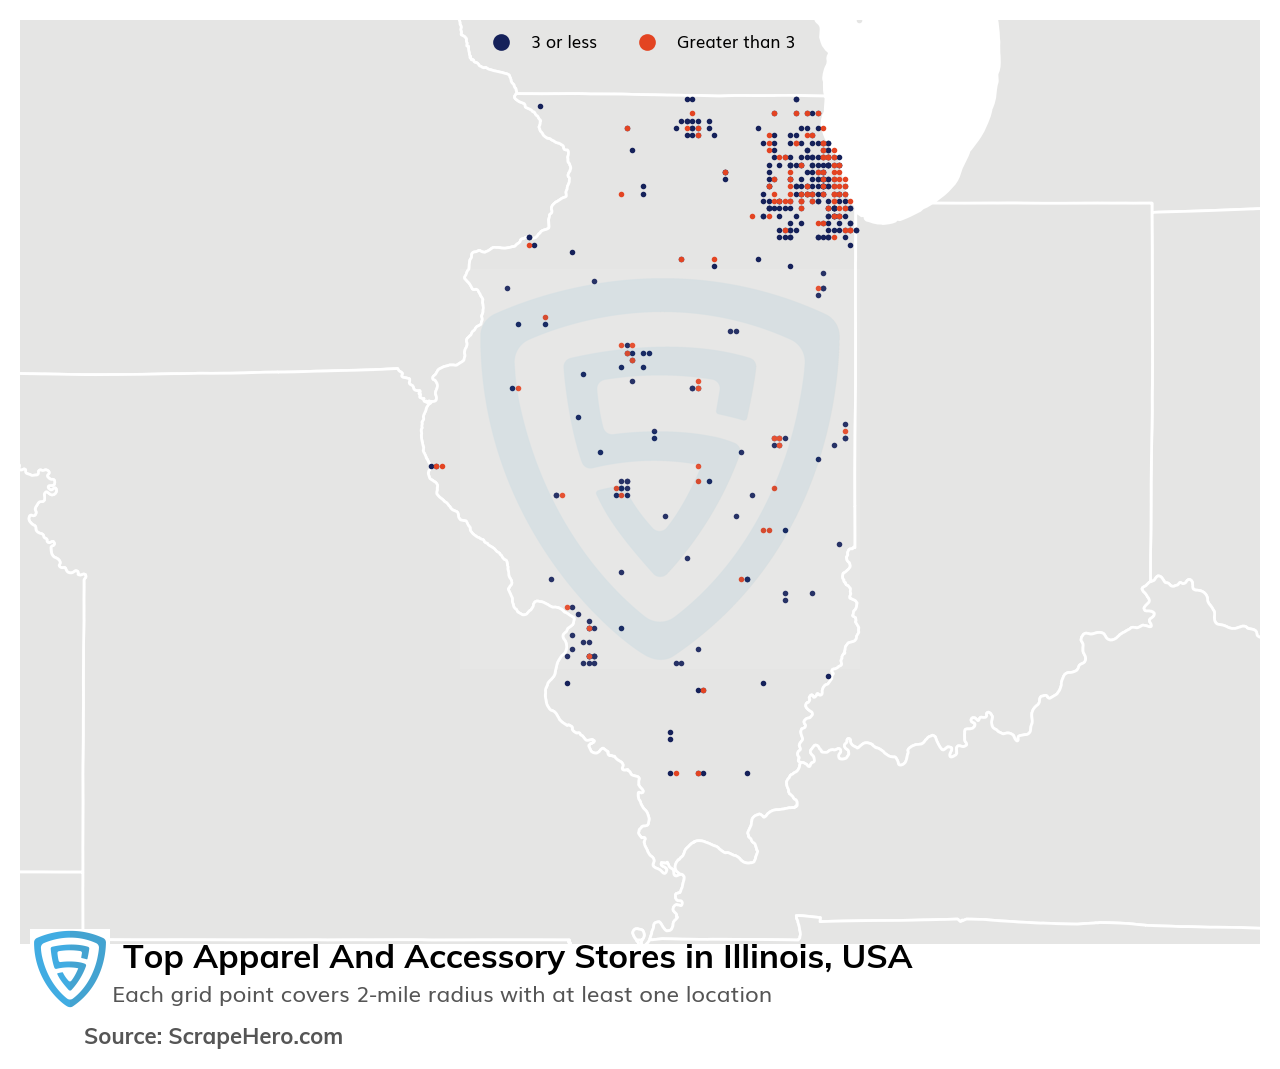 Map of 10 Largest apparel & accessory stores in Illinois in 2022 Based on Locations